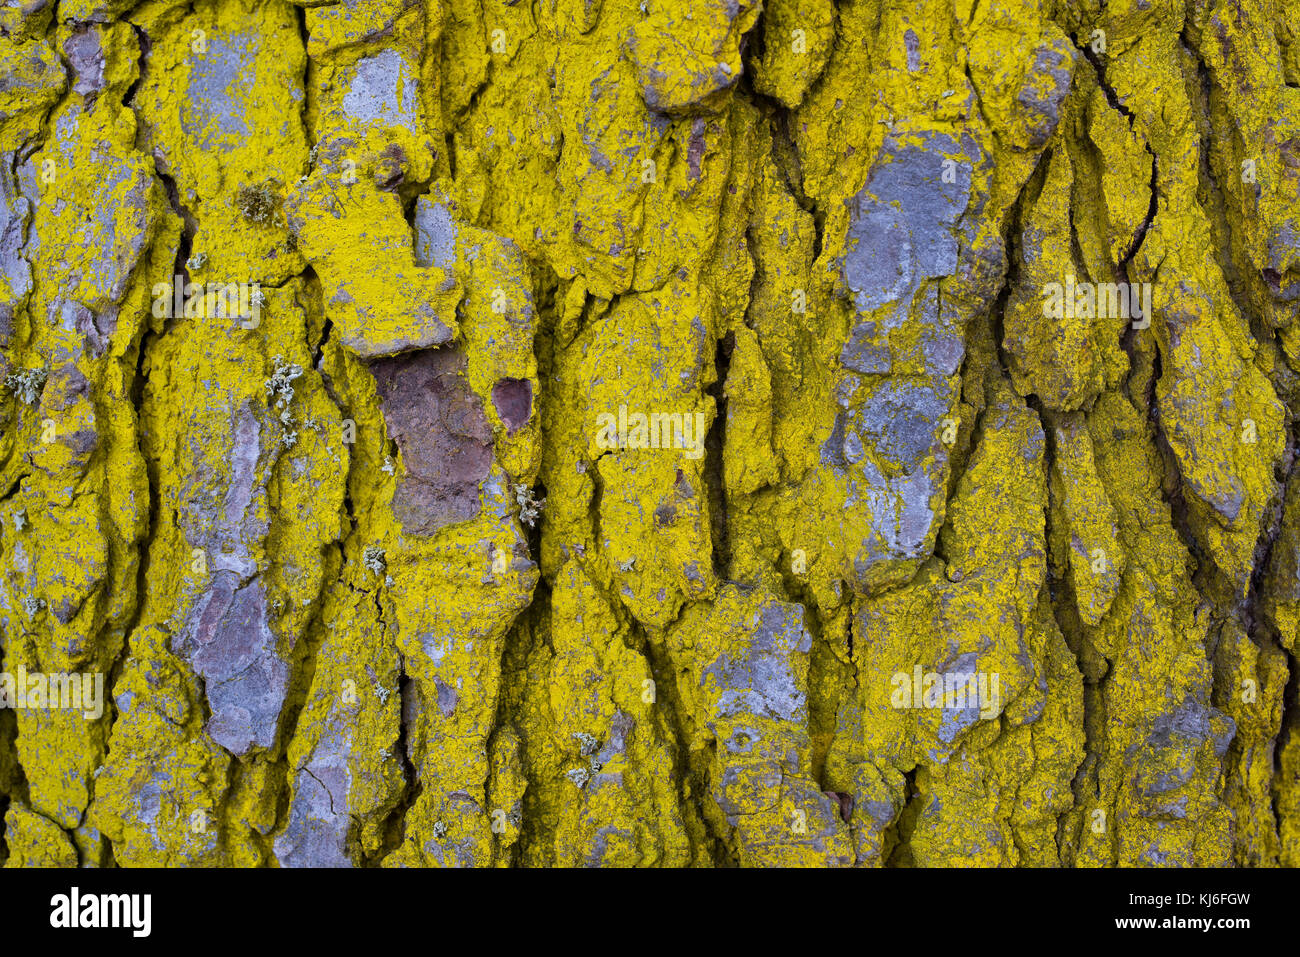 Wooden pattern and texture of tree bark. Stock Photo